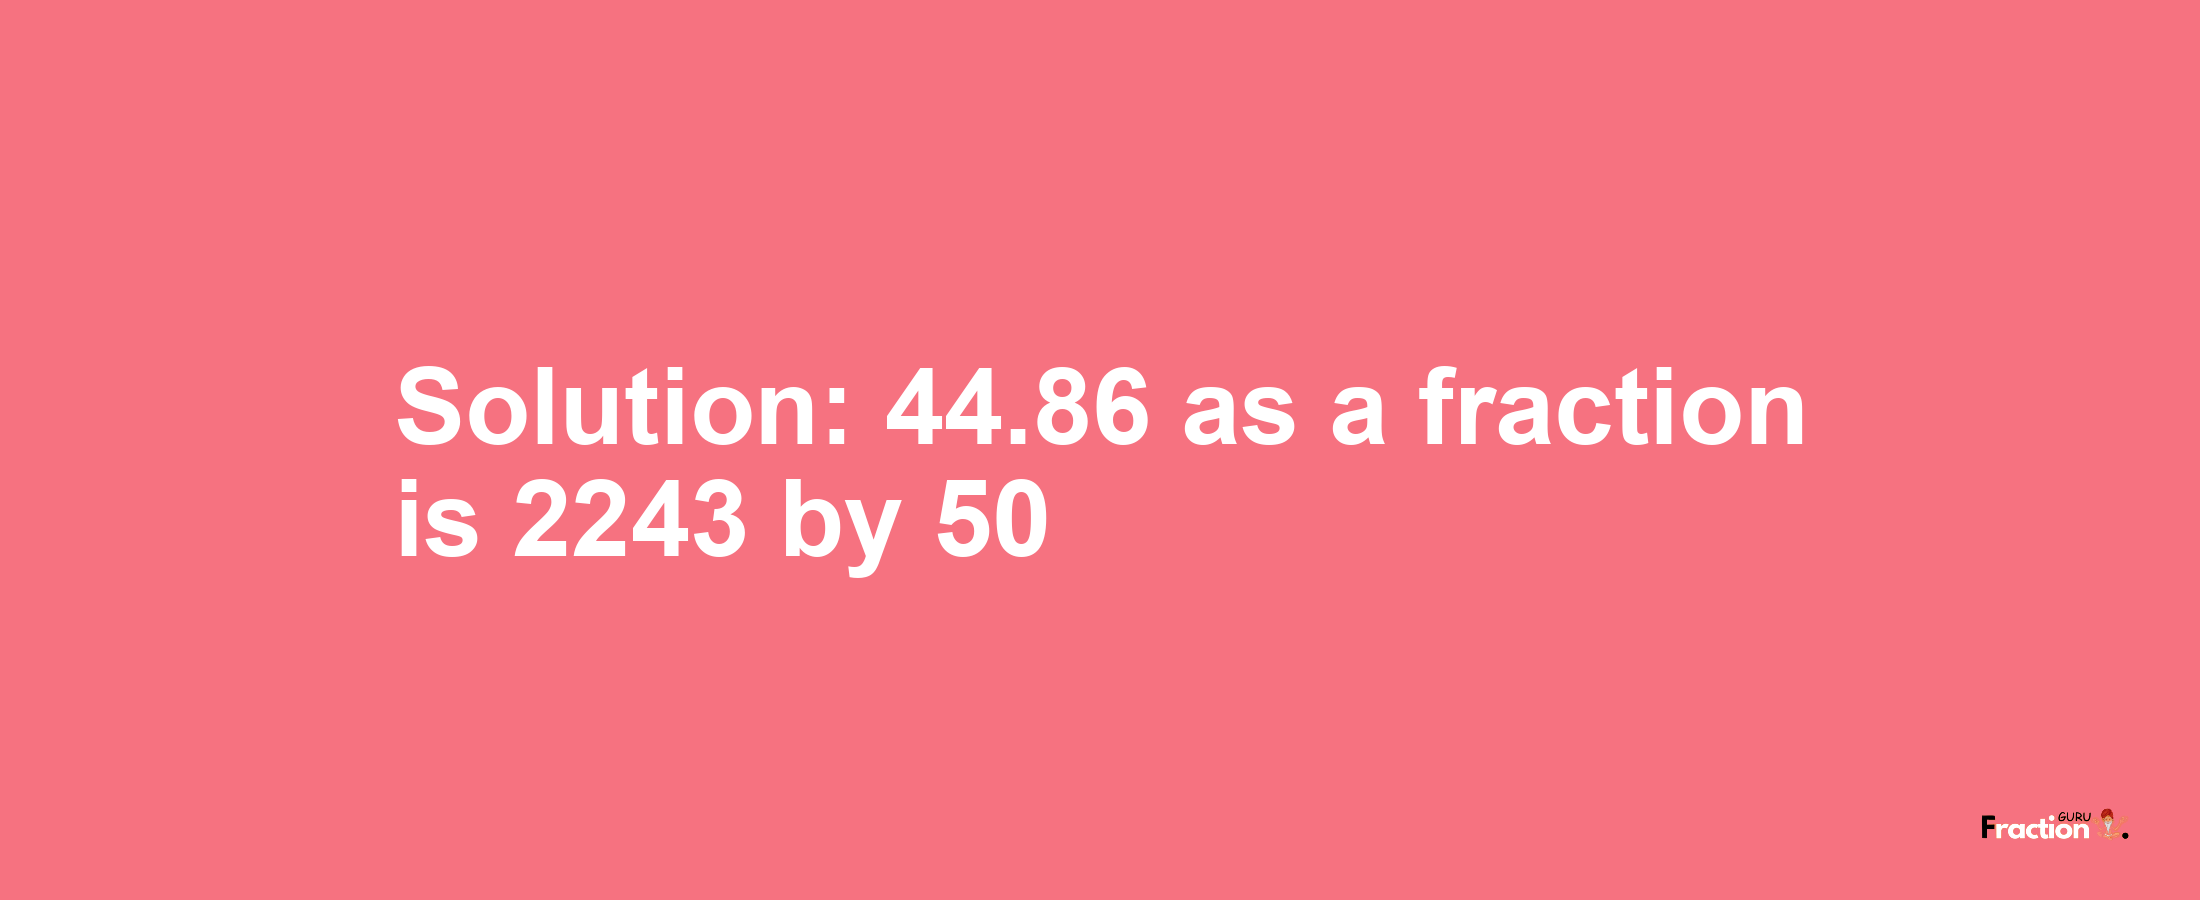 Solution:44.86 as a fraction is 2243/50